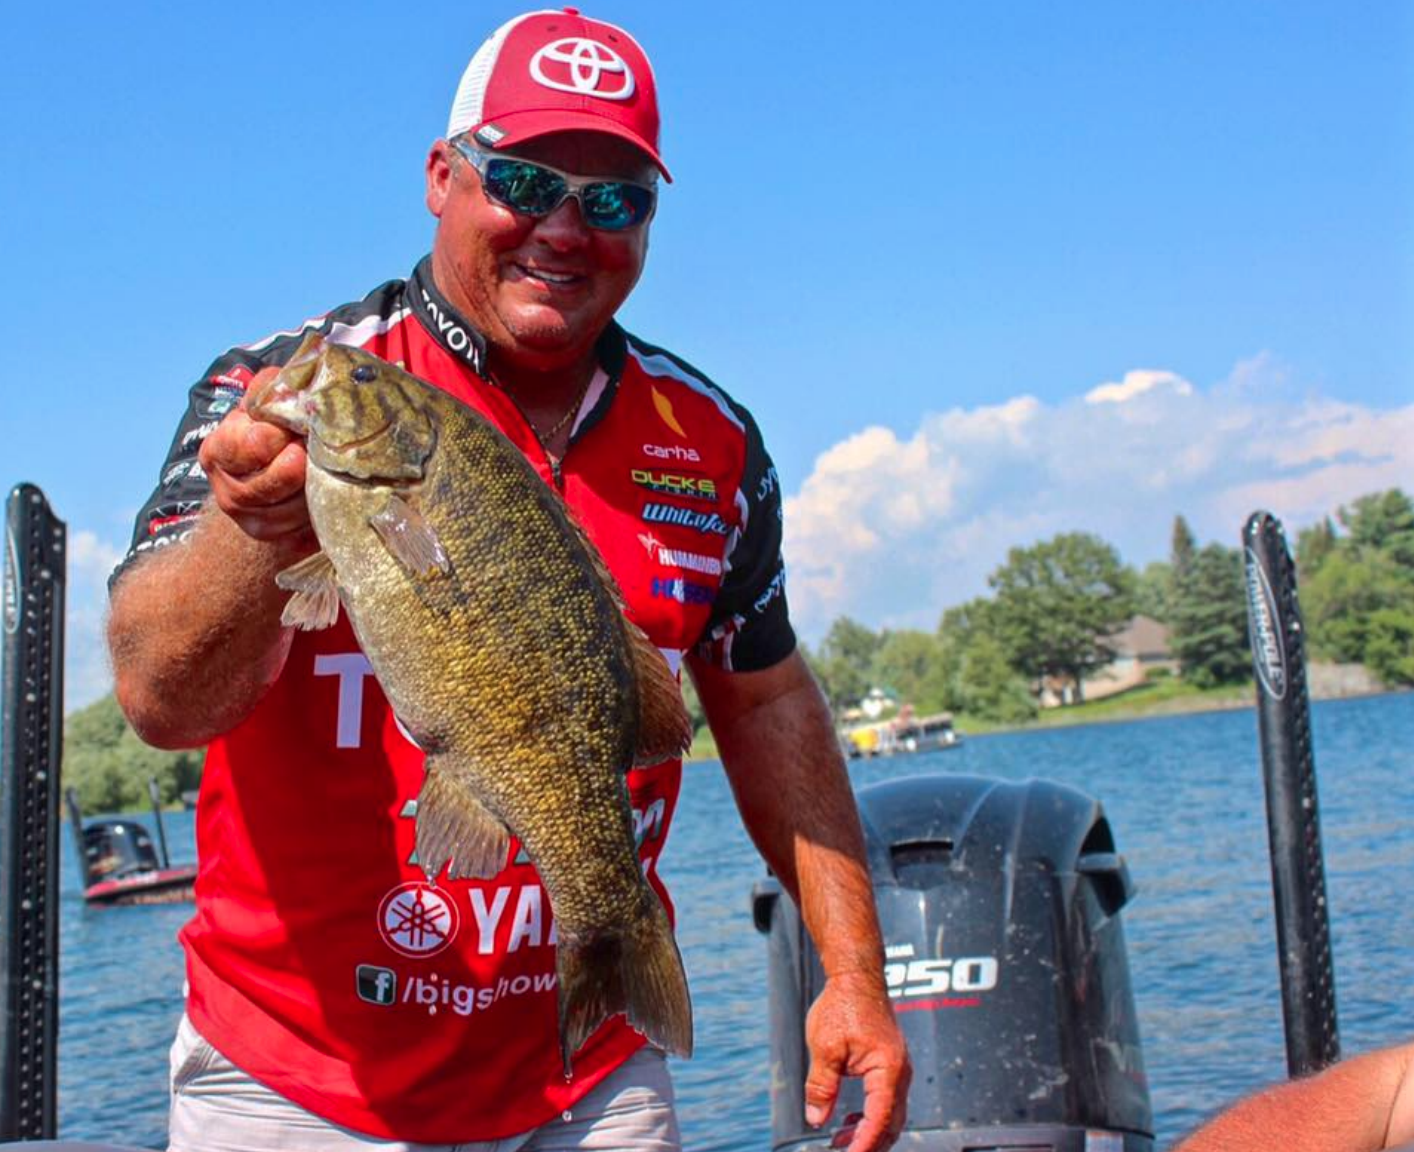 <h4>8lb. Largemouth vs. 6lb. Smallmouth?</h4>
<b>Green vs. Brown. Is it more impressive to land an 8-pound largemouth or a 6-pound smallie?</b><BR>
In fishing, size matters. But there are a lot of variables that affect a lakeâs ability to grow giant bassâgreen or brown. Florida big-bass specialist Terry Scroggins weighs-in on what makes a giant smallie such an impressive feat.
âYou know a 6-pound smallmouth is an old fish, whereas it doesnât take long for an 8-pound largemouth in, say, Florida to get that big.
âBecause of its age, that smallmouth has got to be smart. Yes, theyâre aggressive, but they wonât bite just anything you throw. Itâs definitely more impressive to find and land a smallie that big.â
